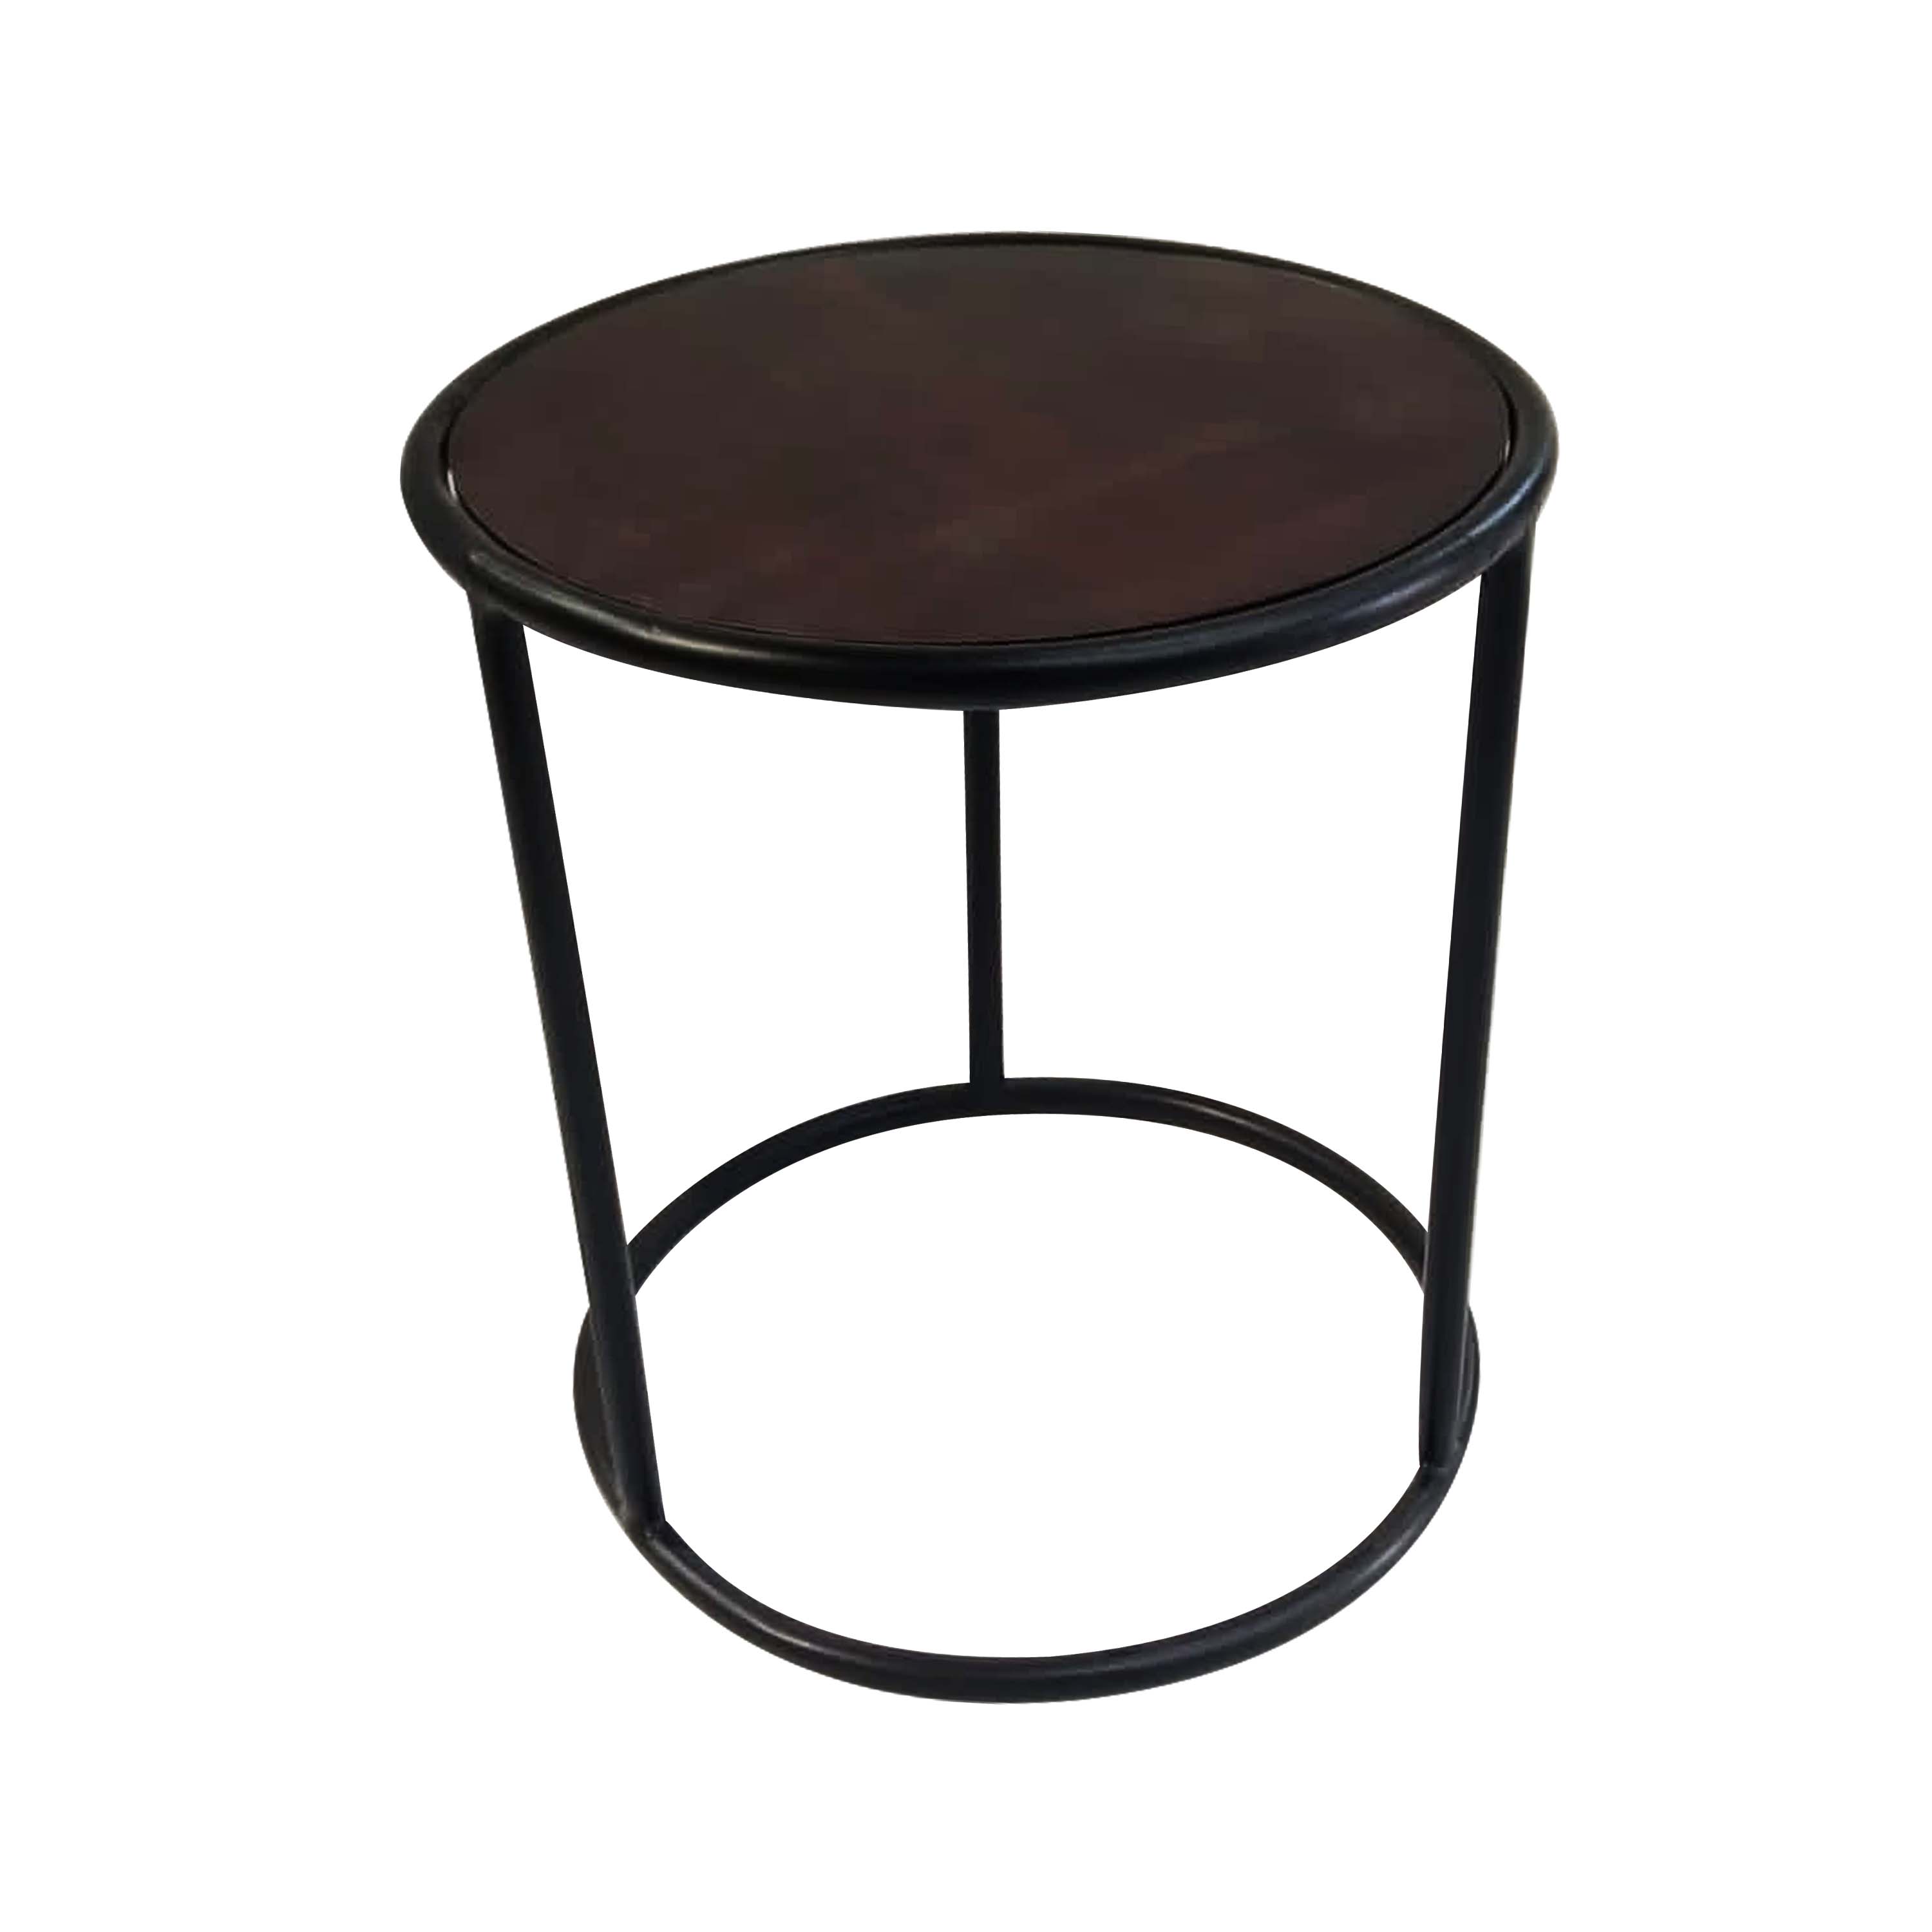 Classique round side table, modern home decor coffee table end table with metal frame for living room